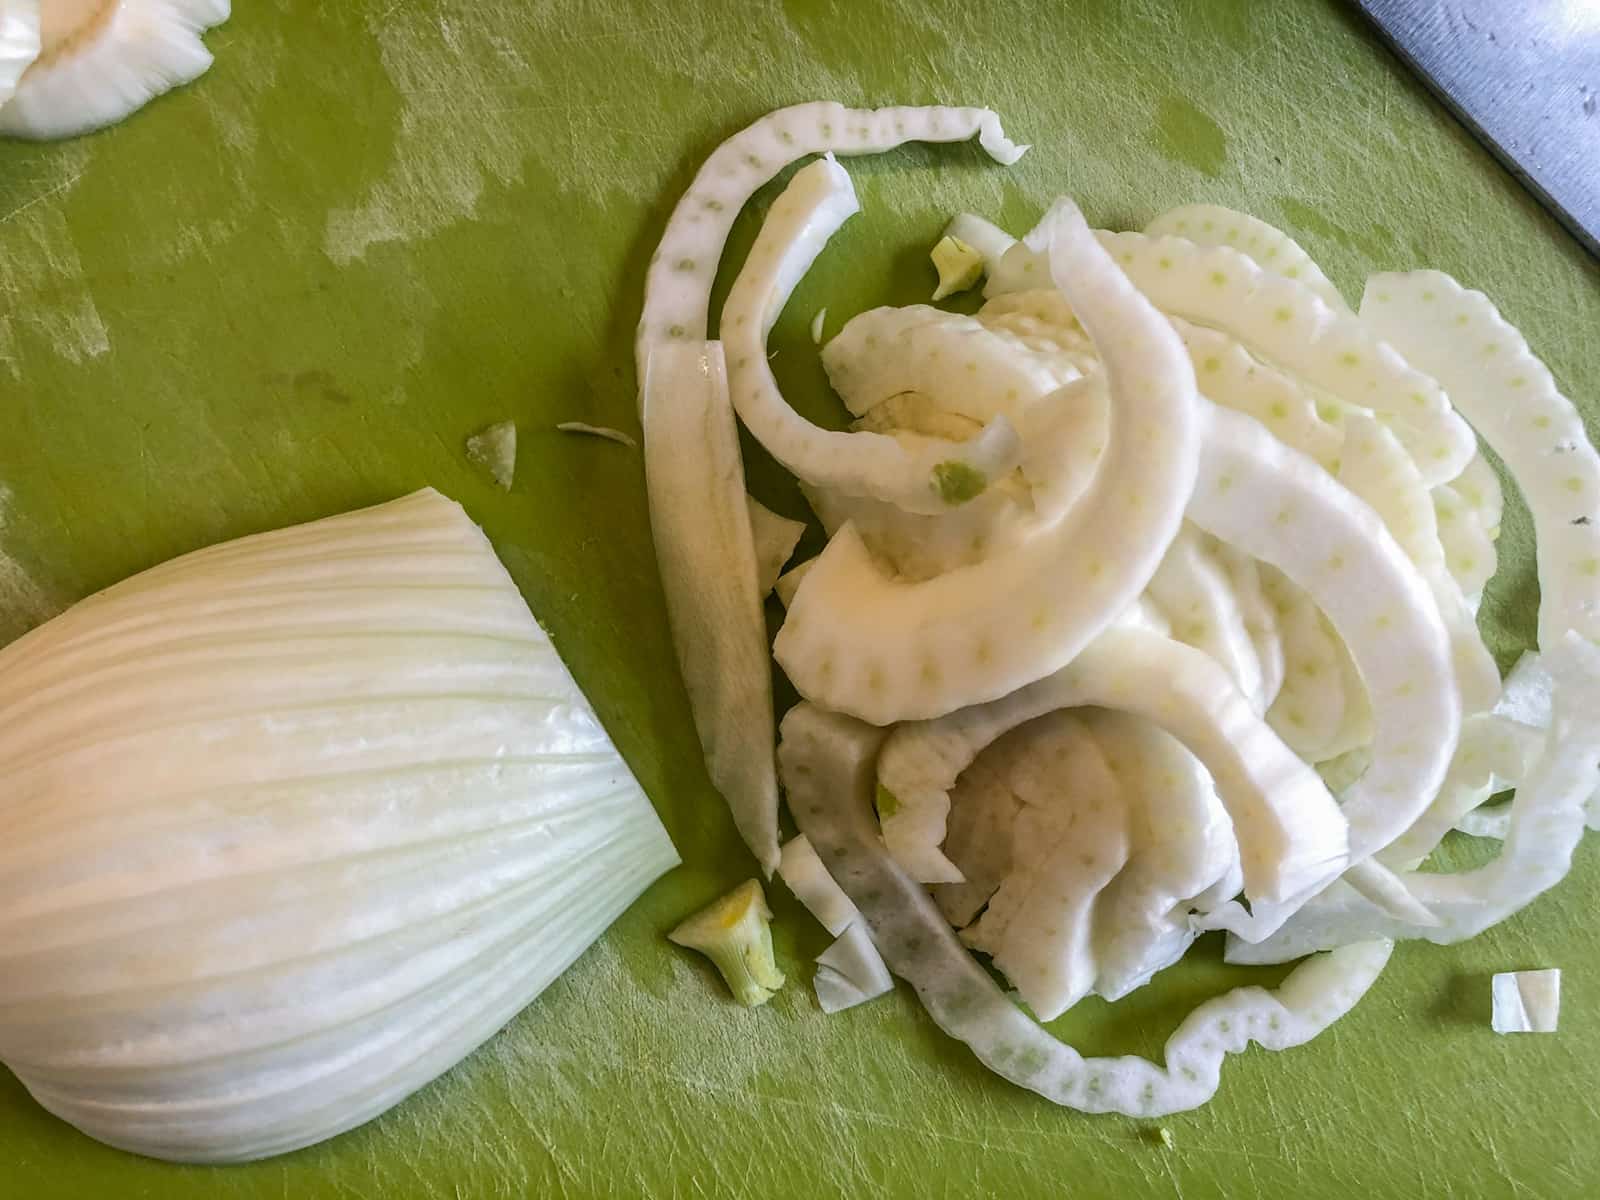 A fennel bulb cut in half and then cut into thin slices.